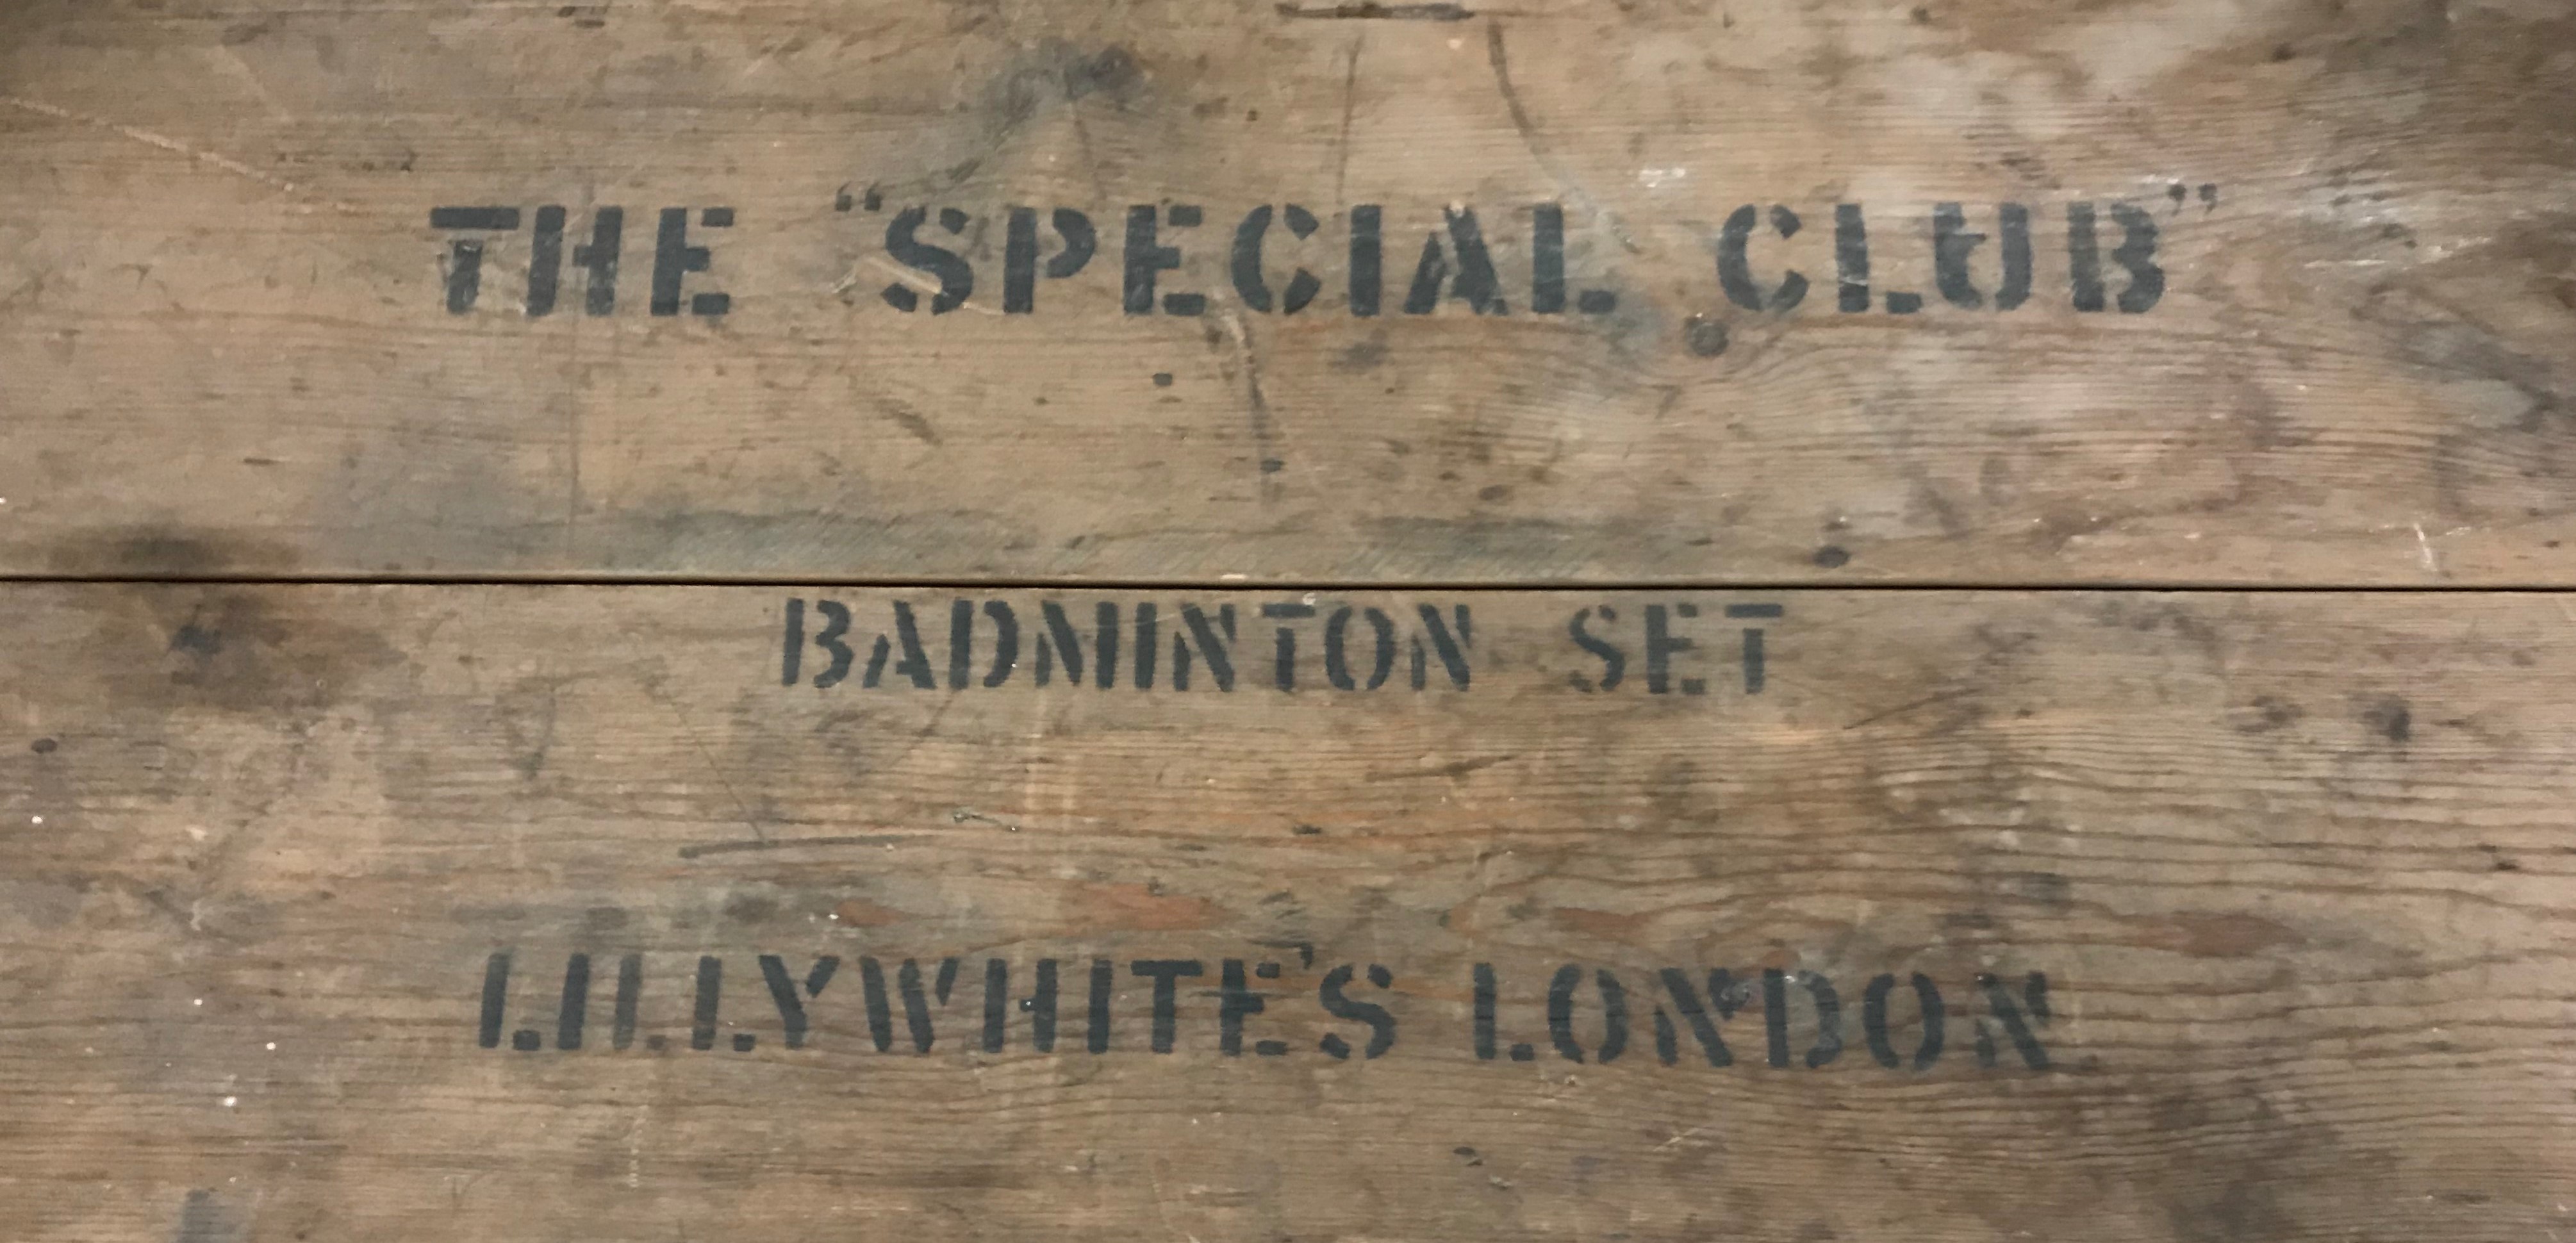 A pine box inscribed "The Special Club badminton set, Lillywhites, - Image 2 of 2